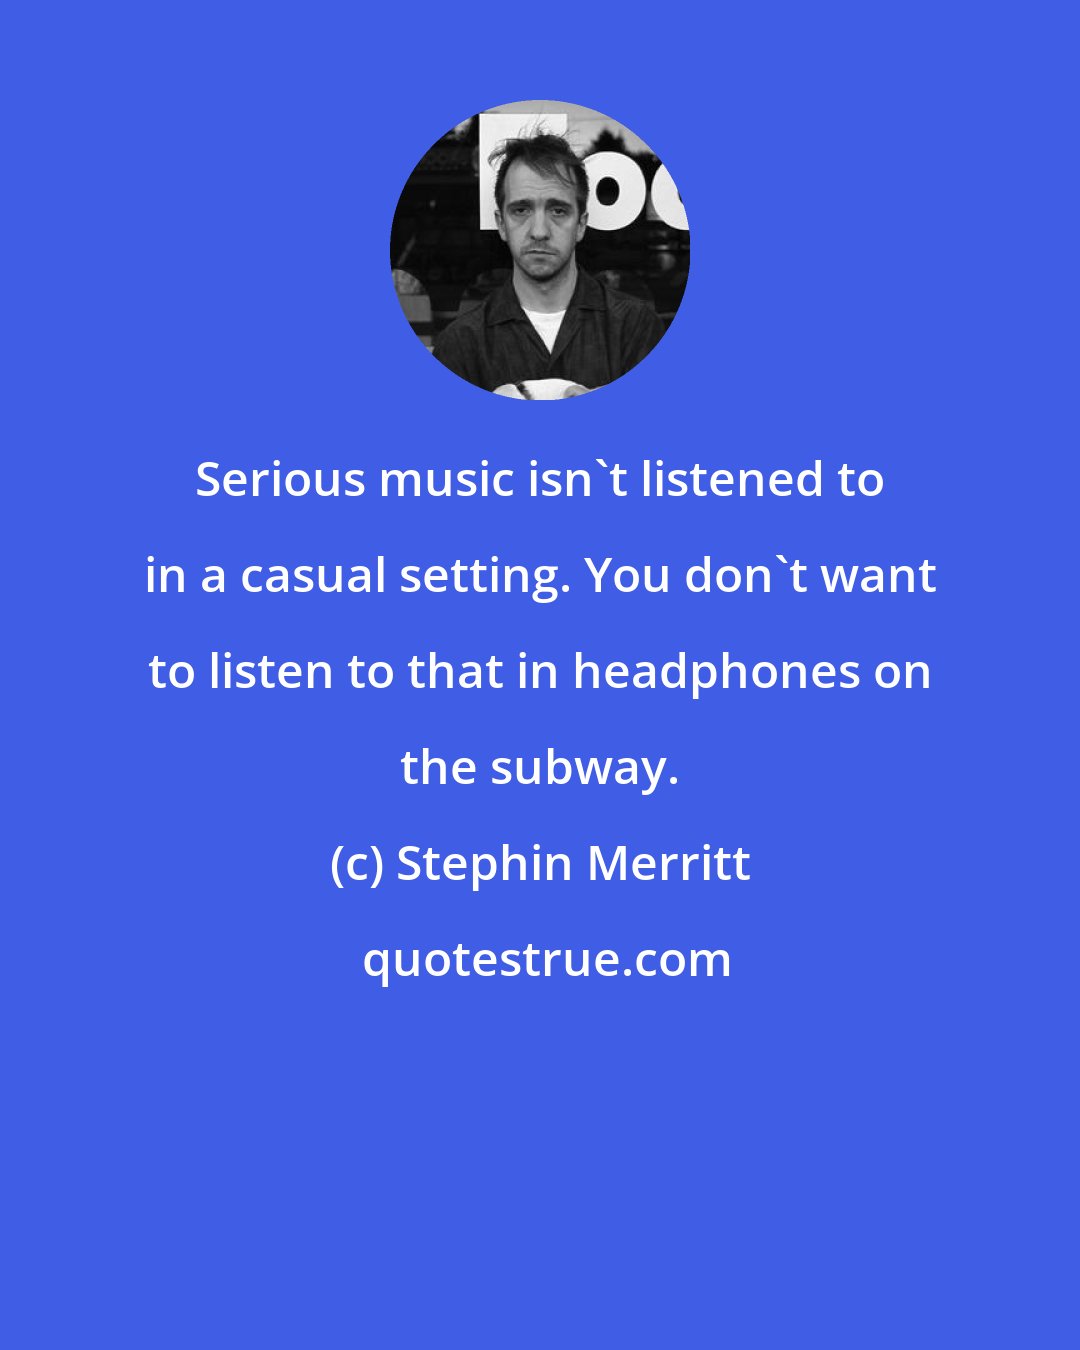 Stephin Merritt: Serious music isn't listened to in a casual setting. You don't want to listen to that in headphones on the subway.